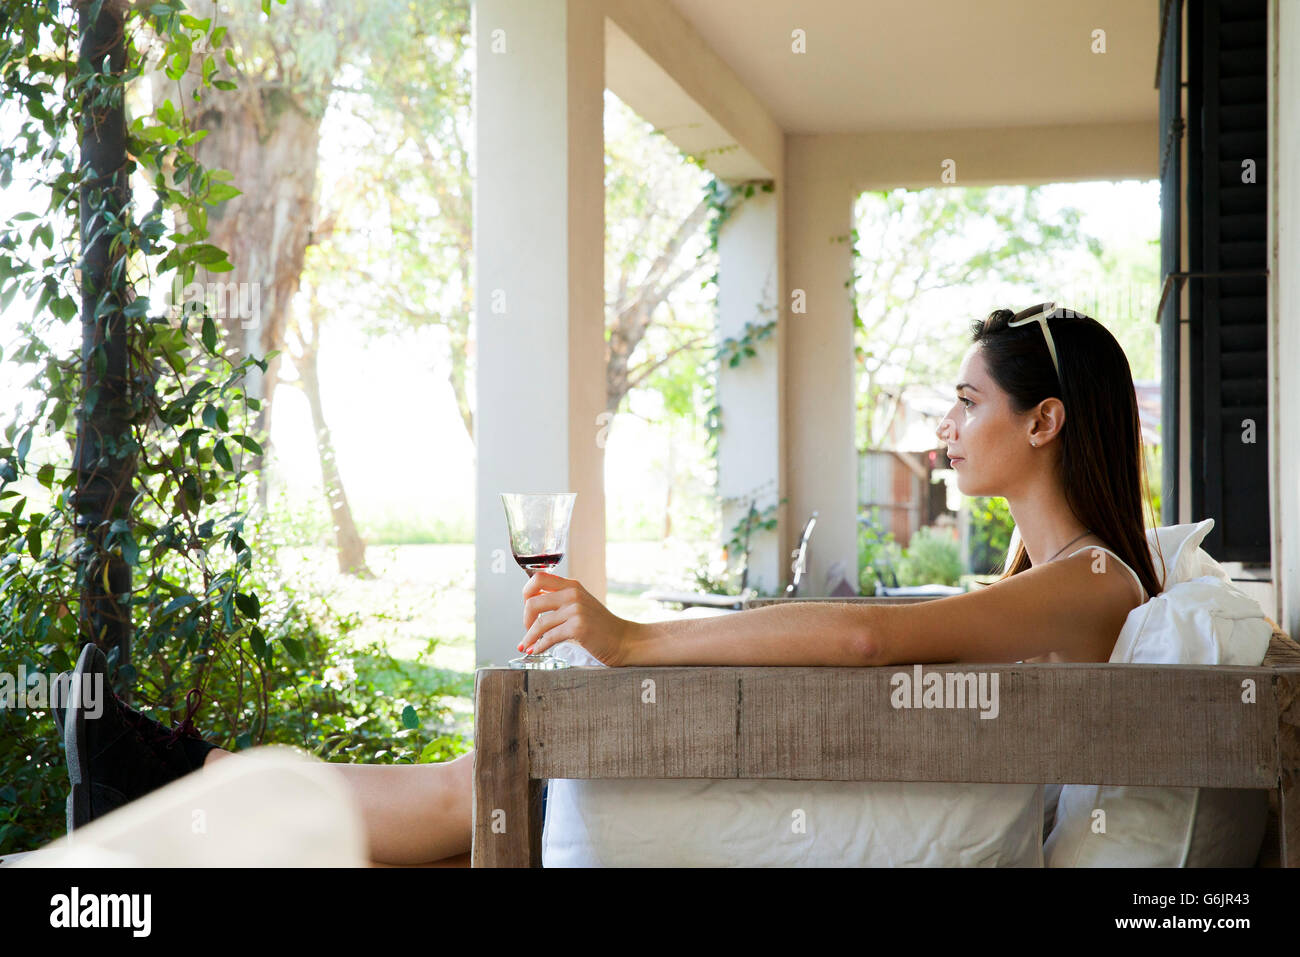 Woman relaxing on veranda with glass of wine Stock Photo